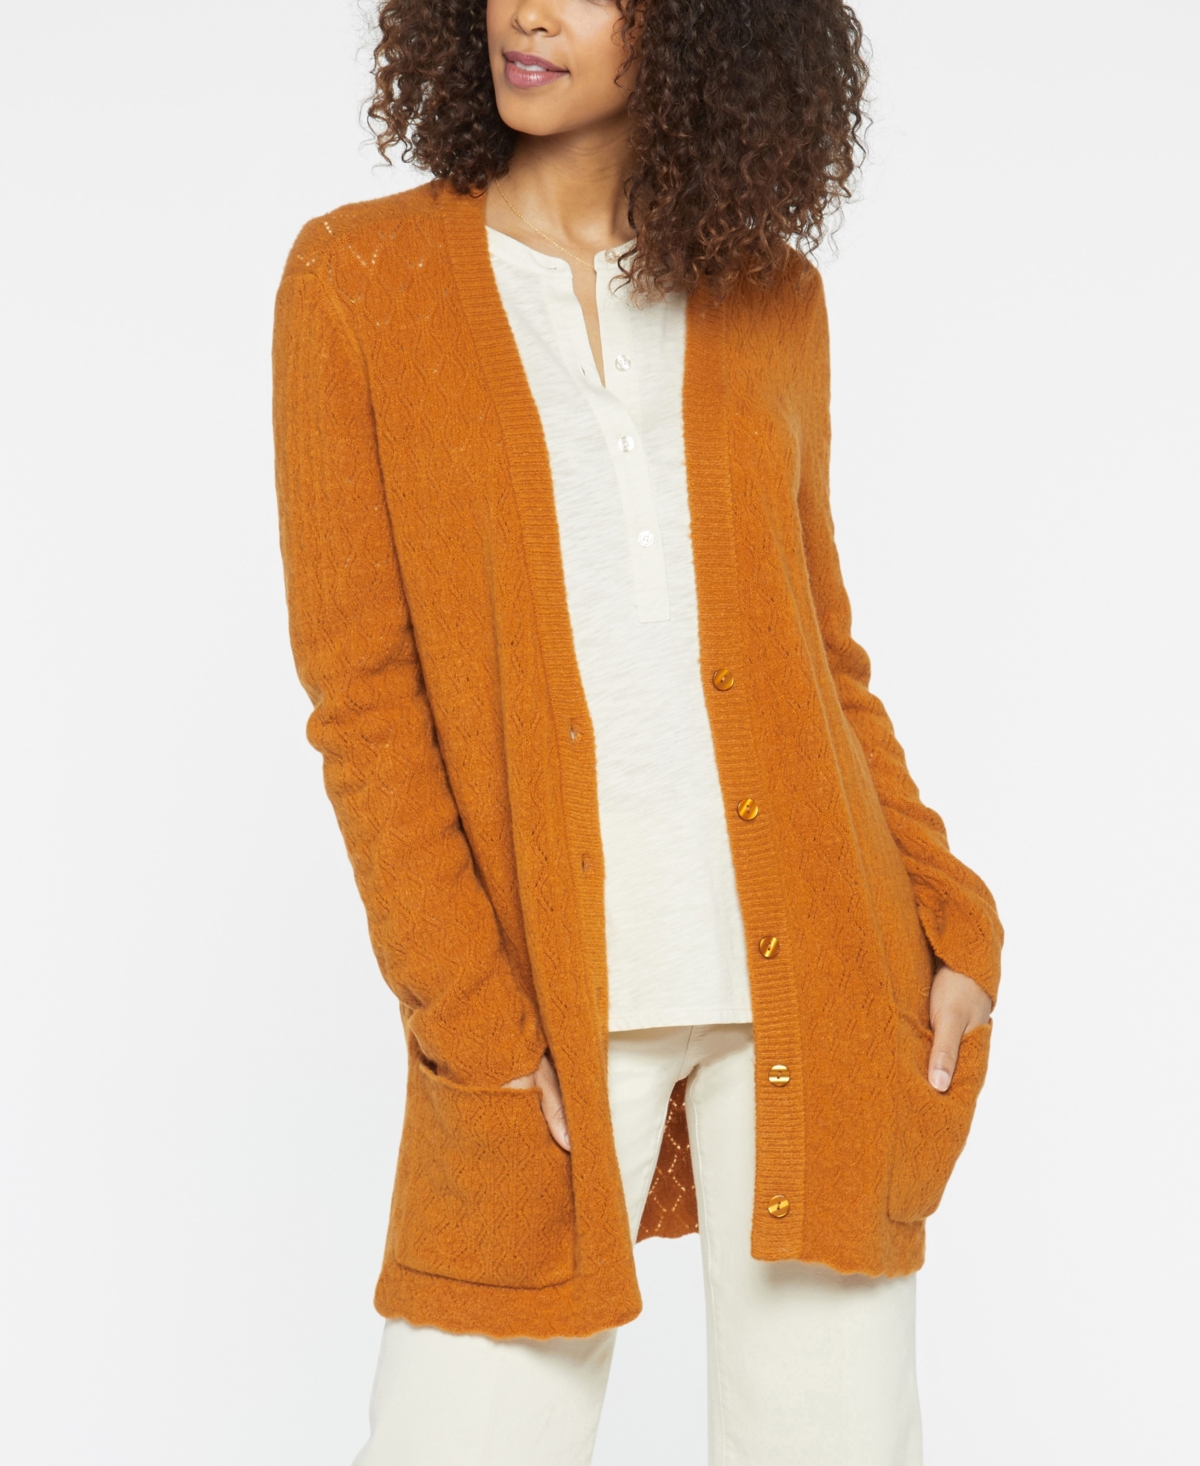 Lucky Brand Venice Open-Front Cardigan Sweater - Macy's